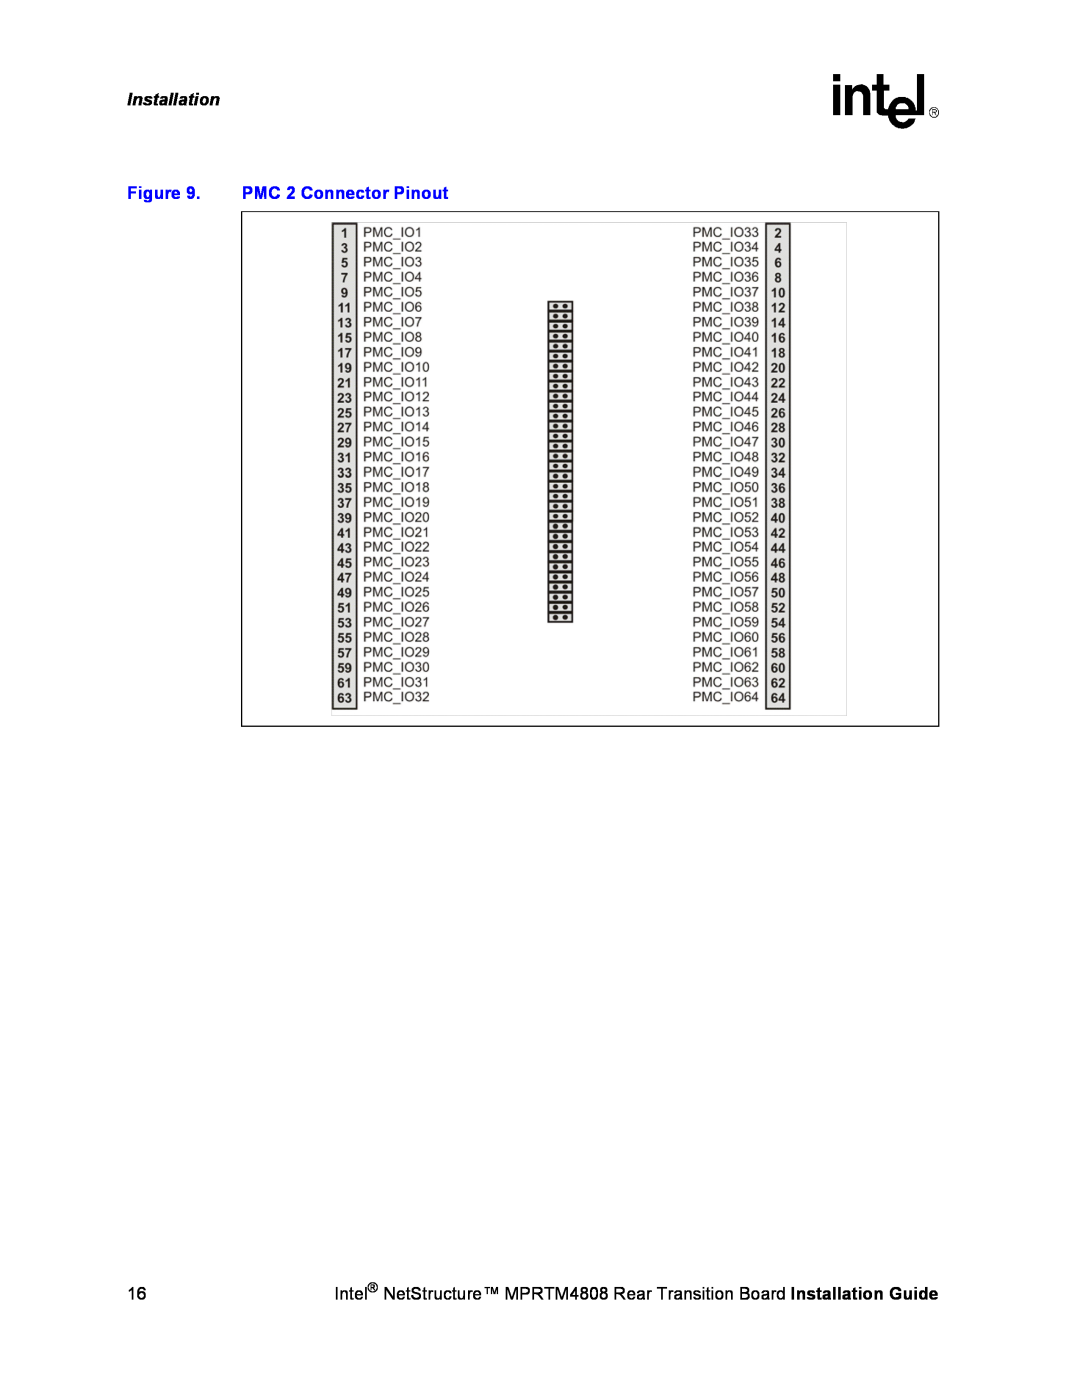 Intel MPRTM4808 manual PMC 2 Connector Pinout, Installation 